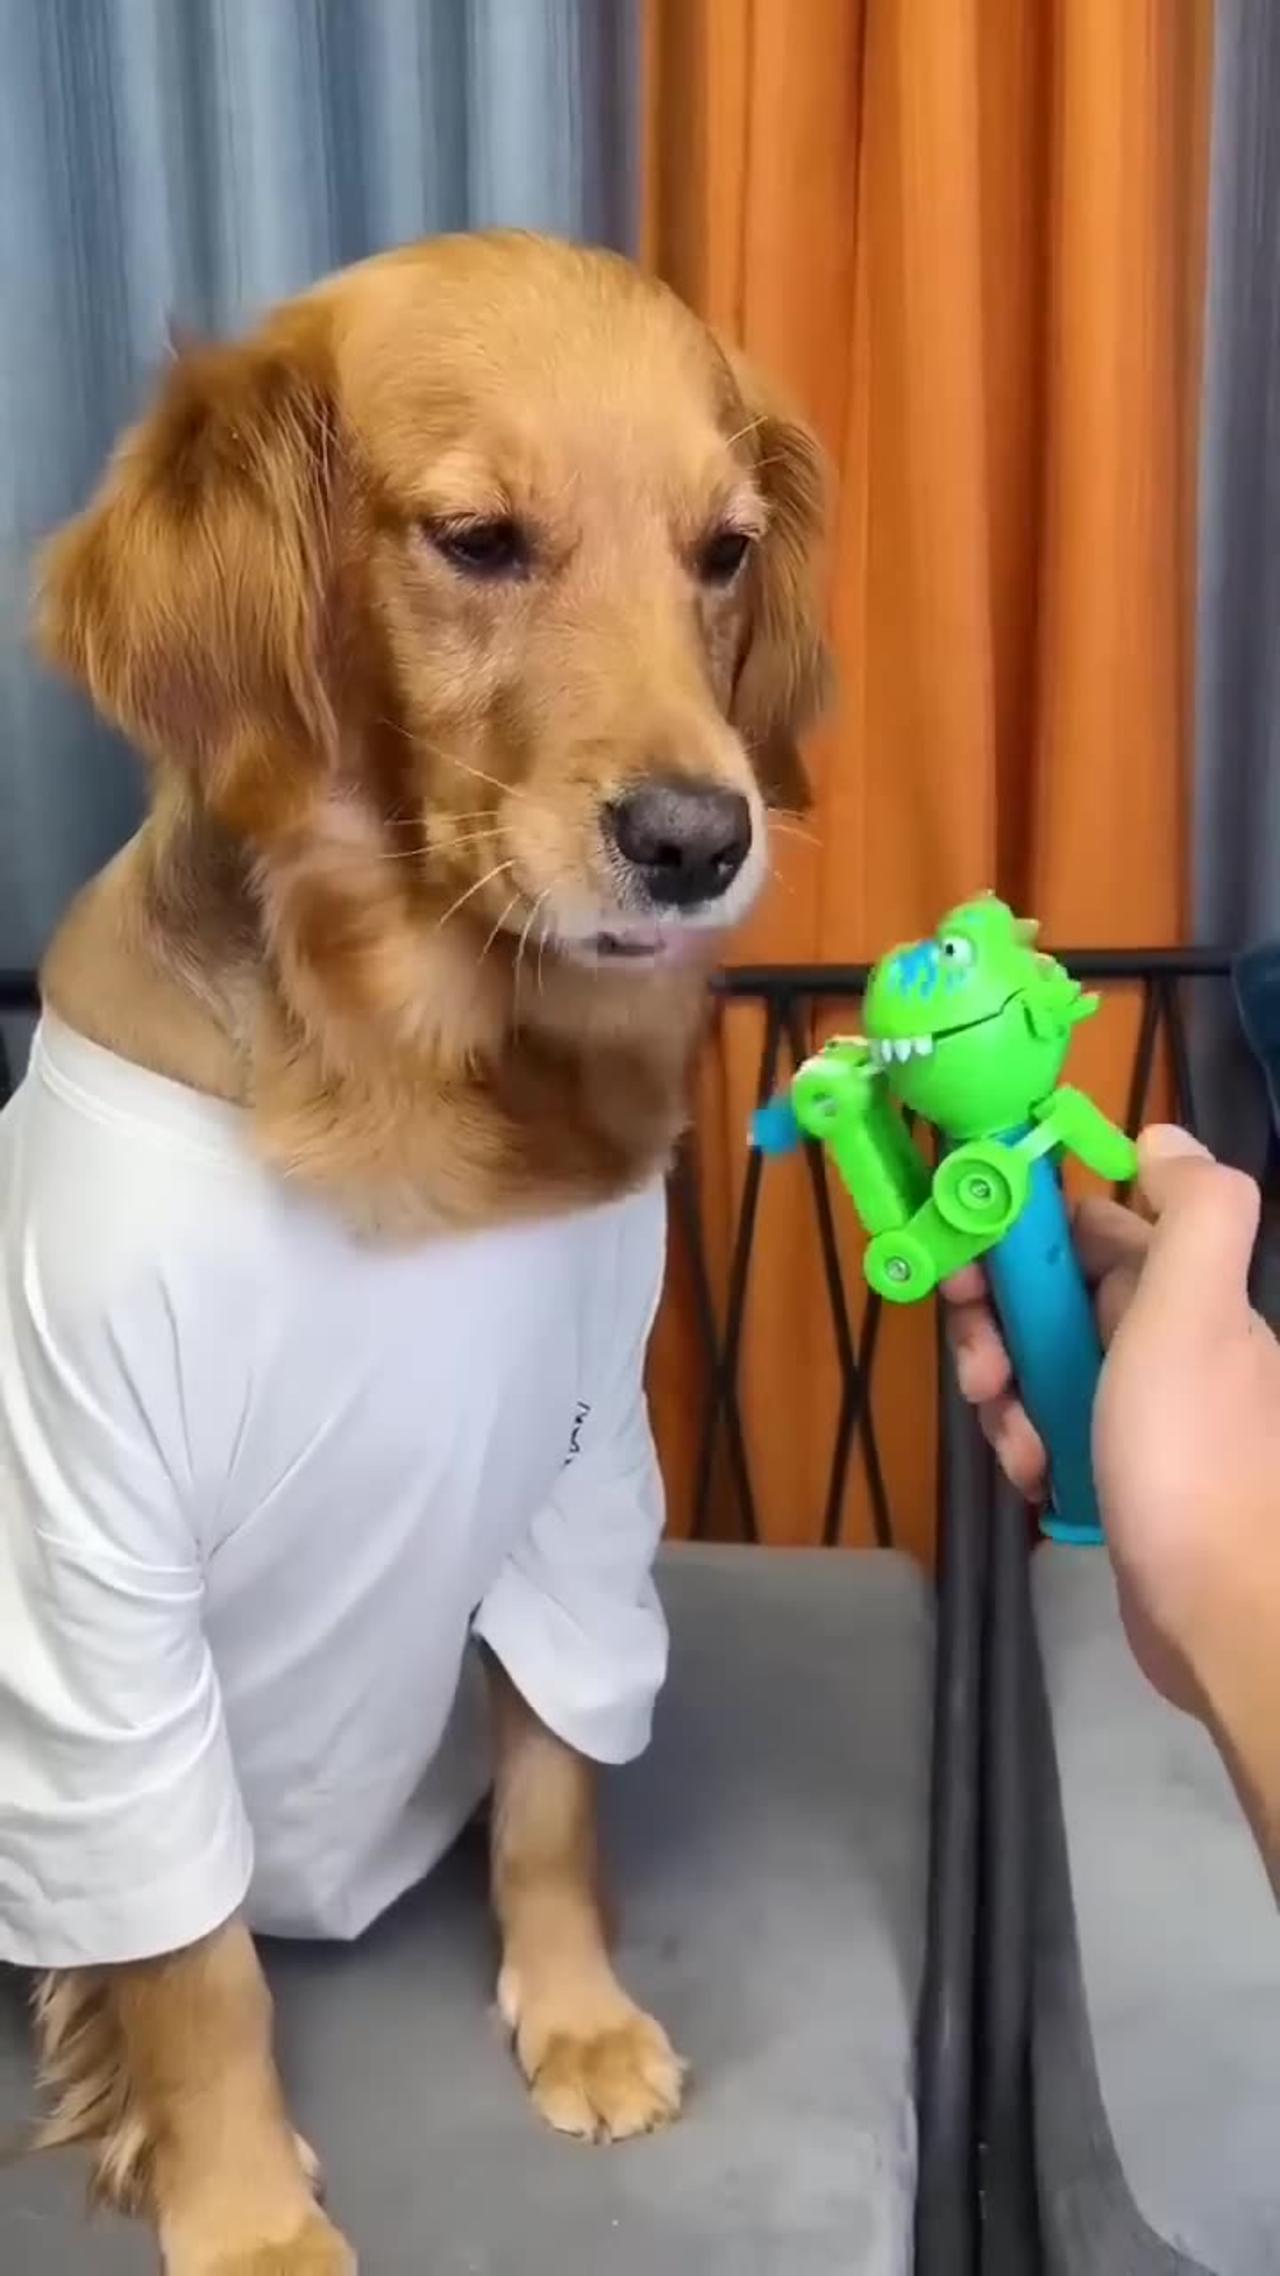 Just because I'm good-natured doesn't mean I won't bite! funny dog videos